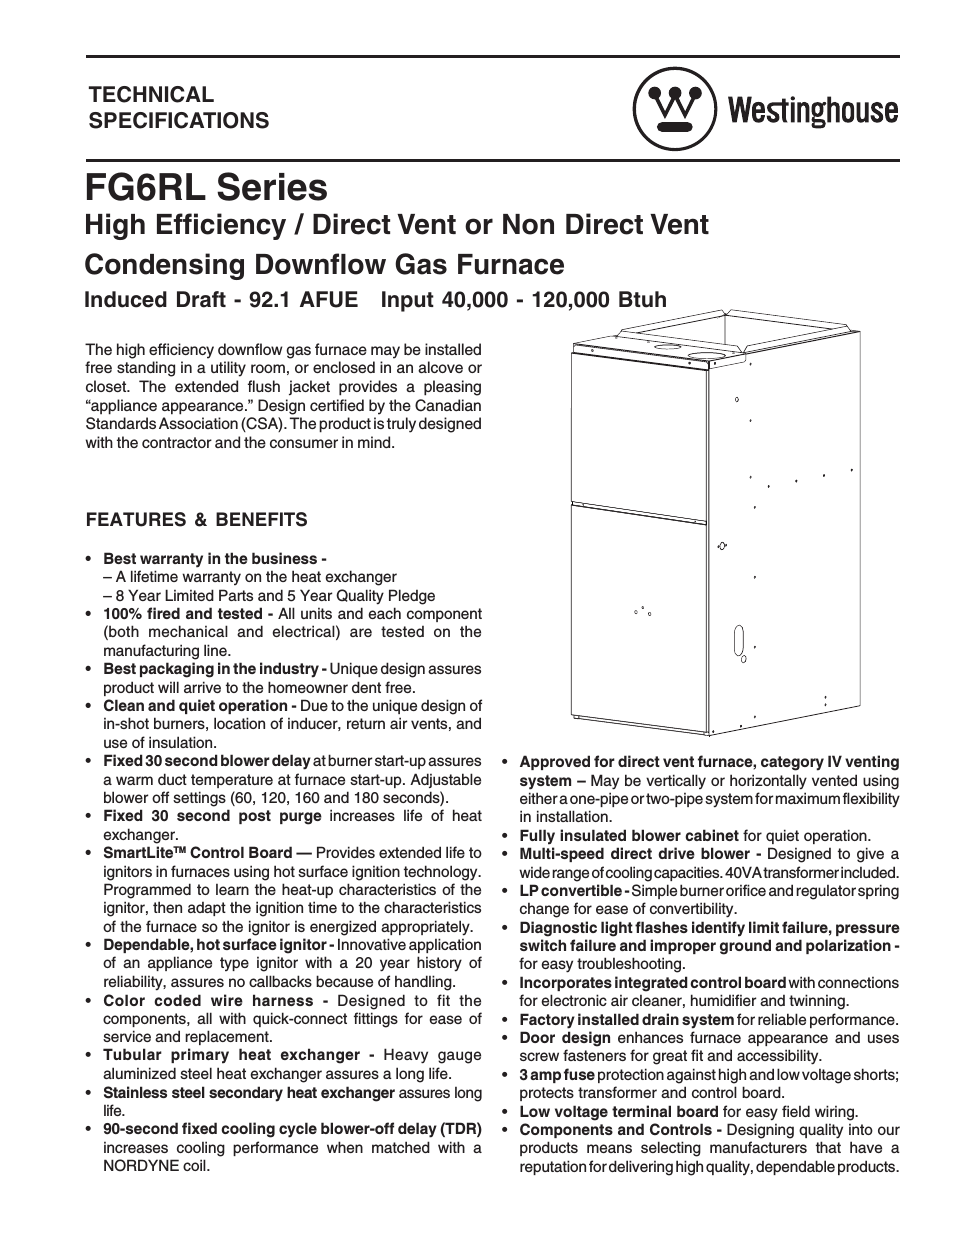 High Efficiency / Direct Vent or Non Direct Vent FG6RL